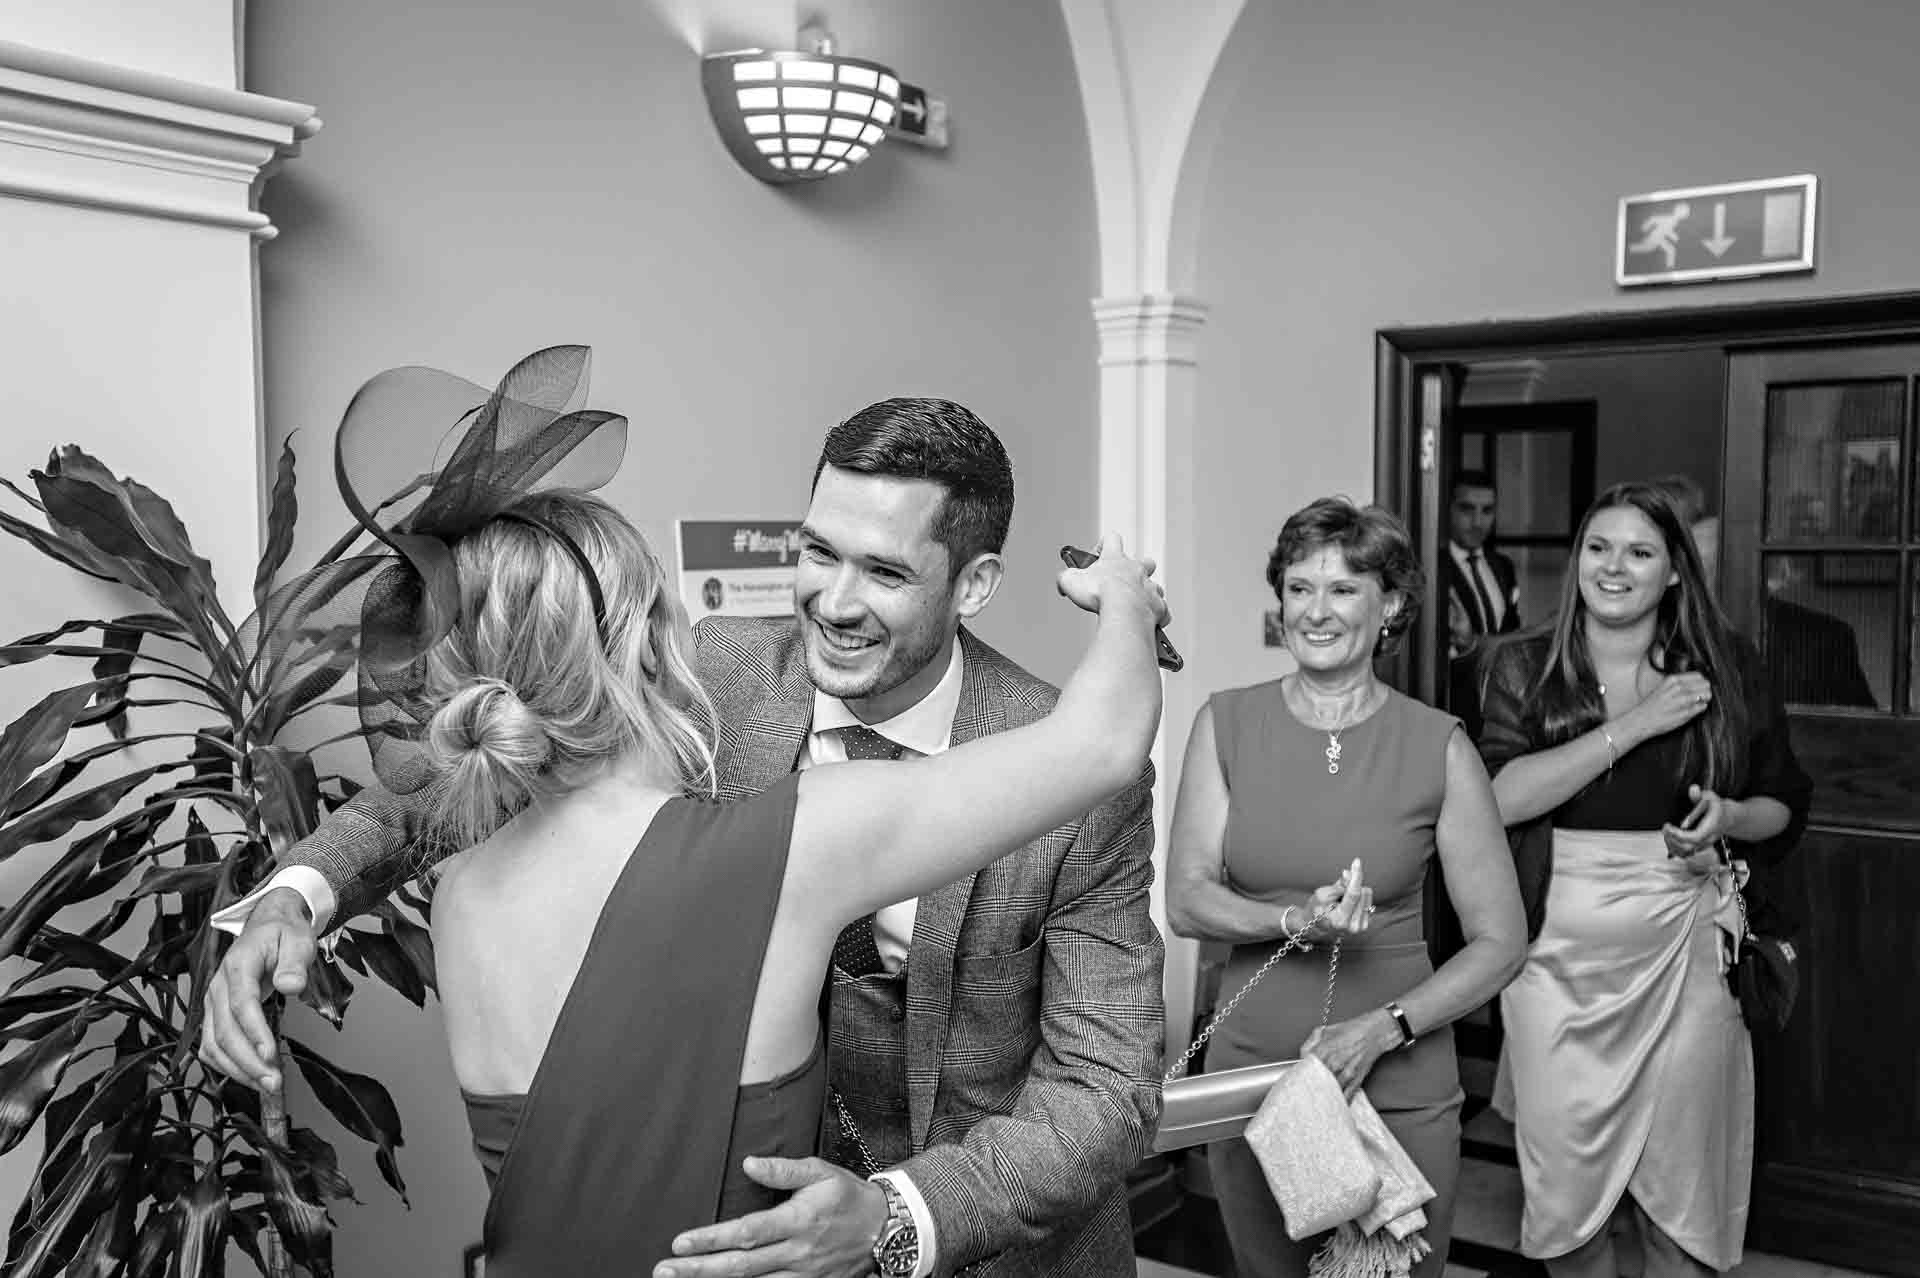 Groom greeting guest with open arms at wedding in London